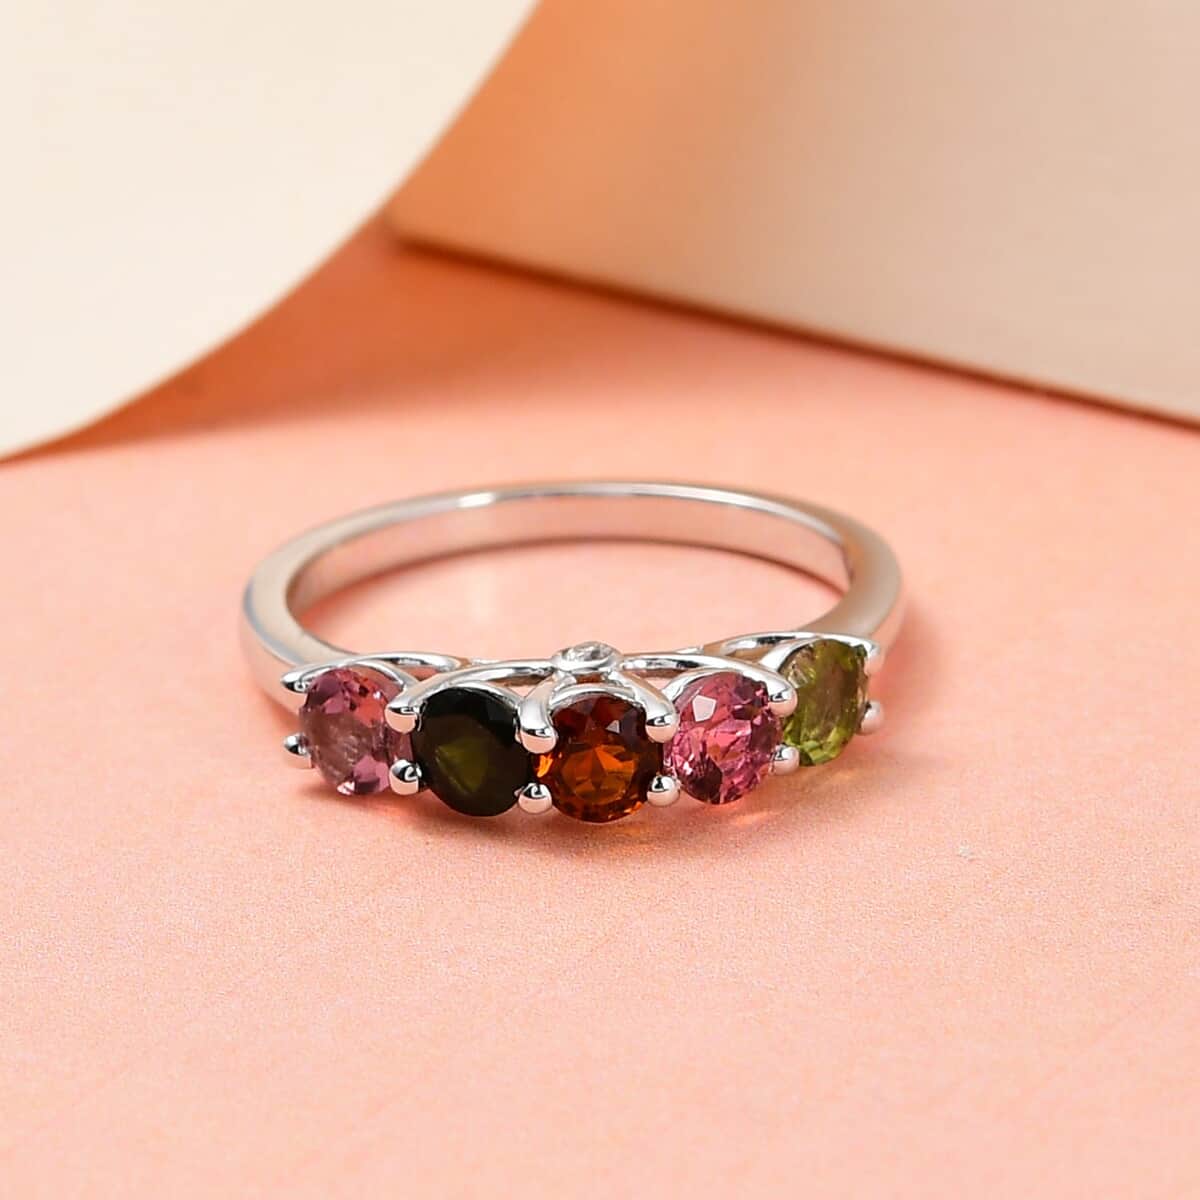 doorbuster-multi-tourmaline-and-natural-white-zircon-5-stone-ring-in-platinum-over-sterling-silver-size-10.0-1.35-ctw image number 1